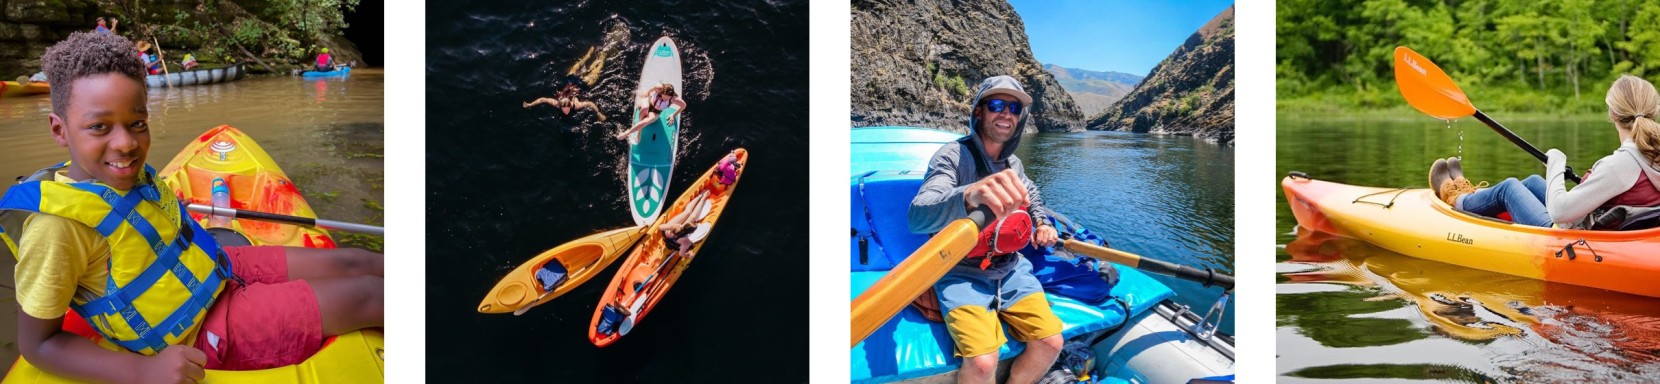 4 images of different people paddling in various settings.